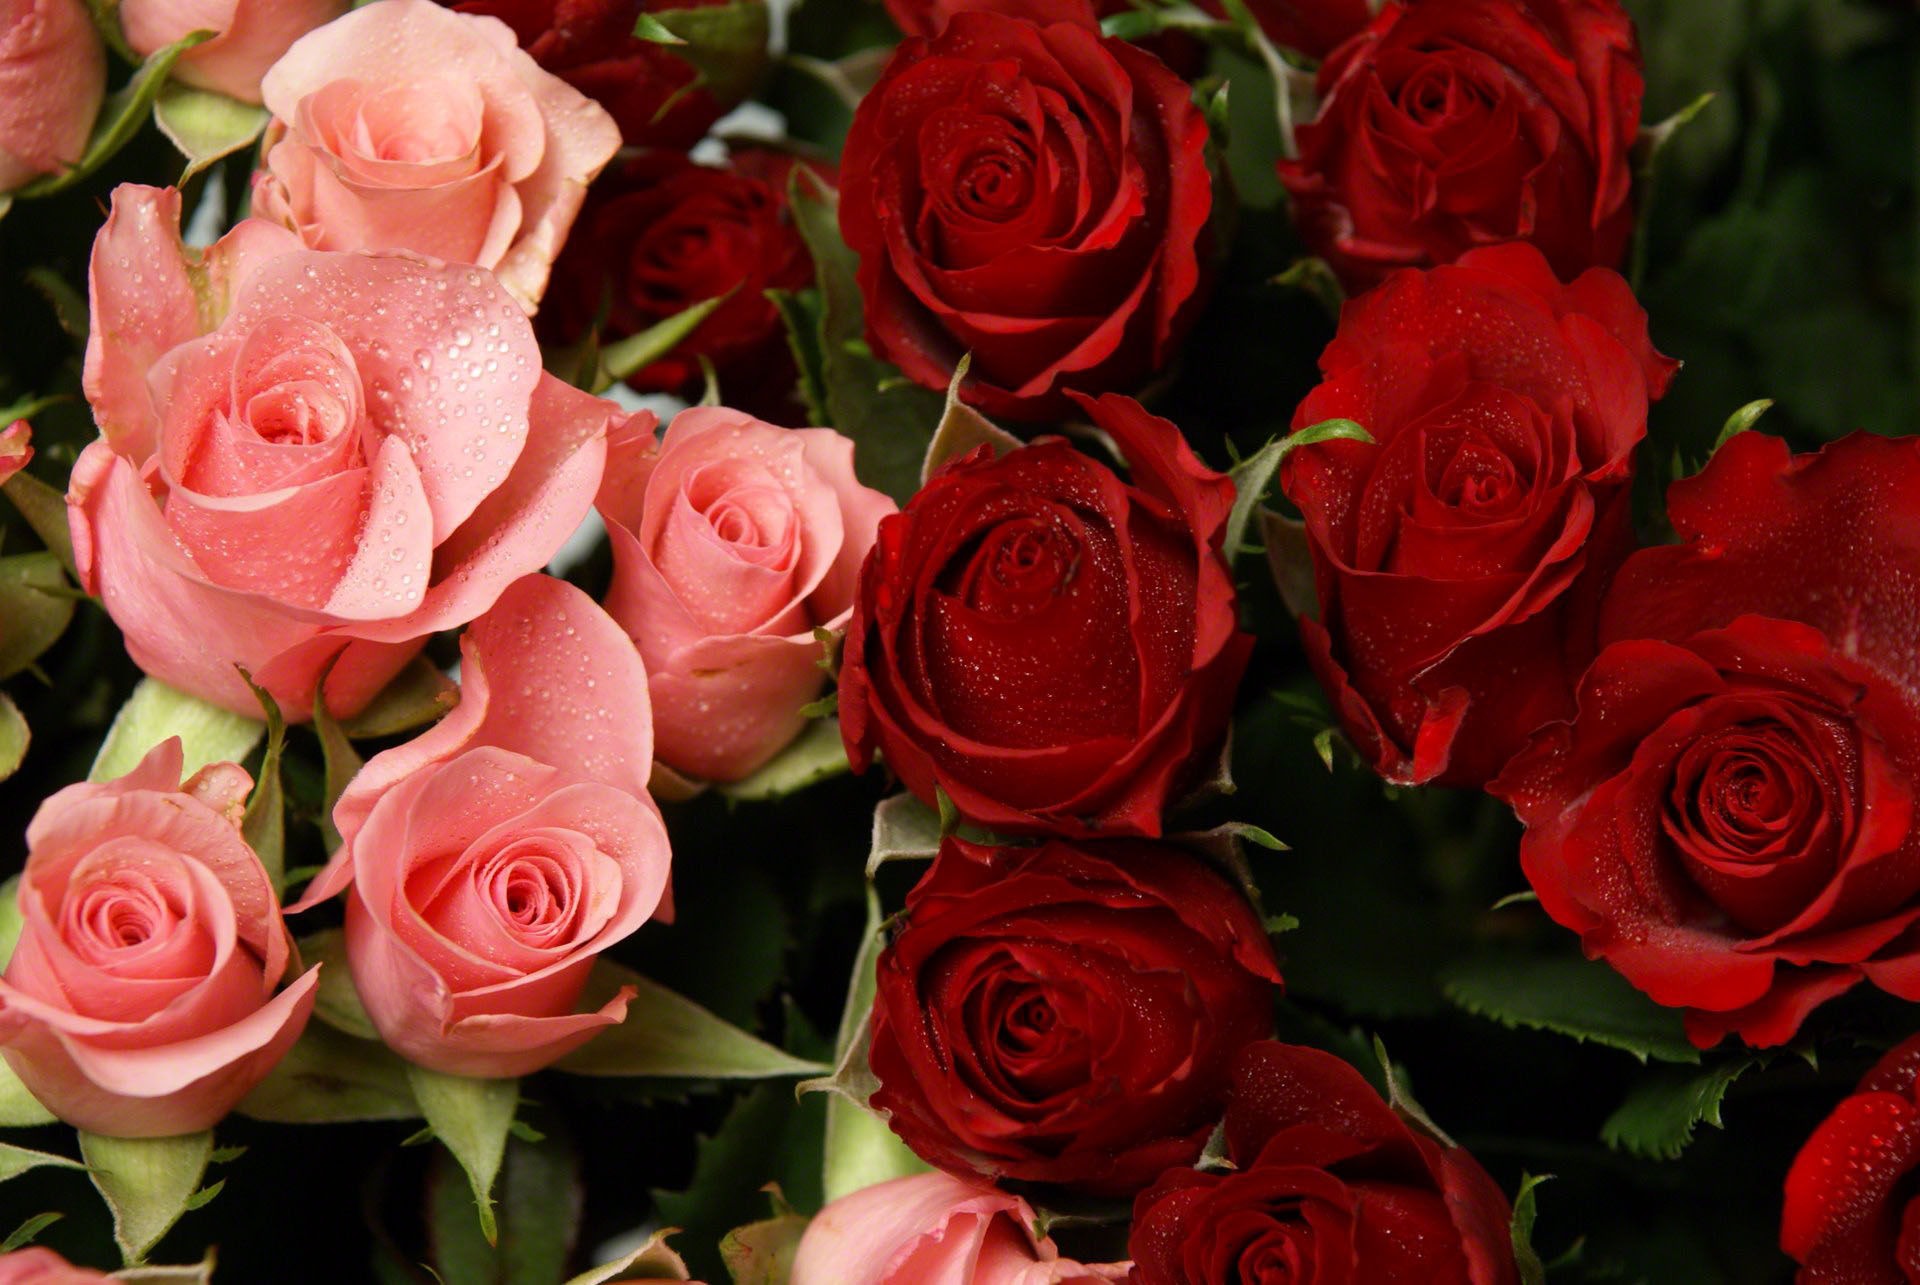 http://www.fabiovisentin.com/photography/photo/12/pink-and-red-roses-01640.jpg